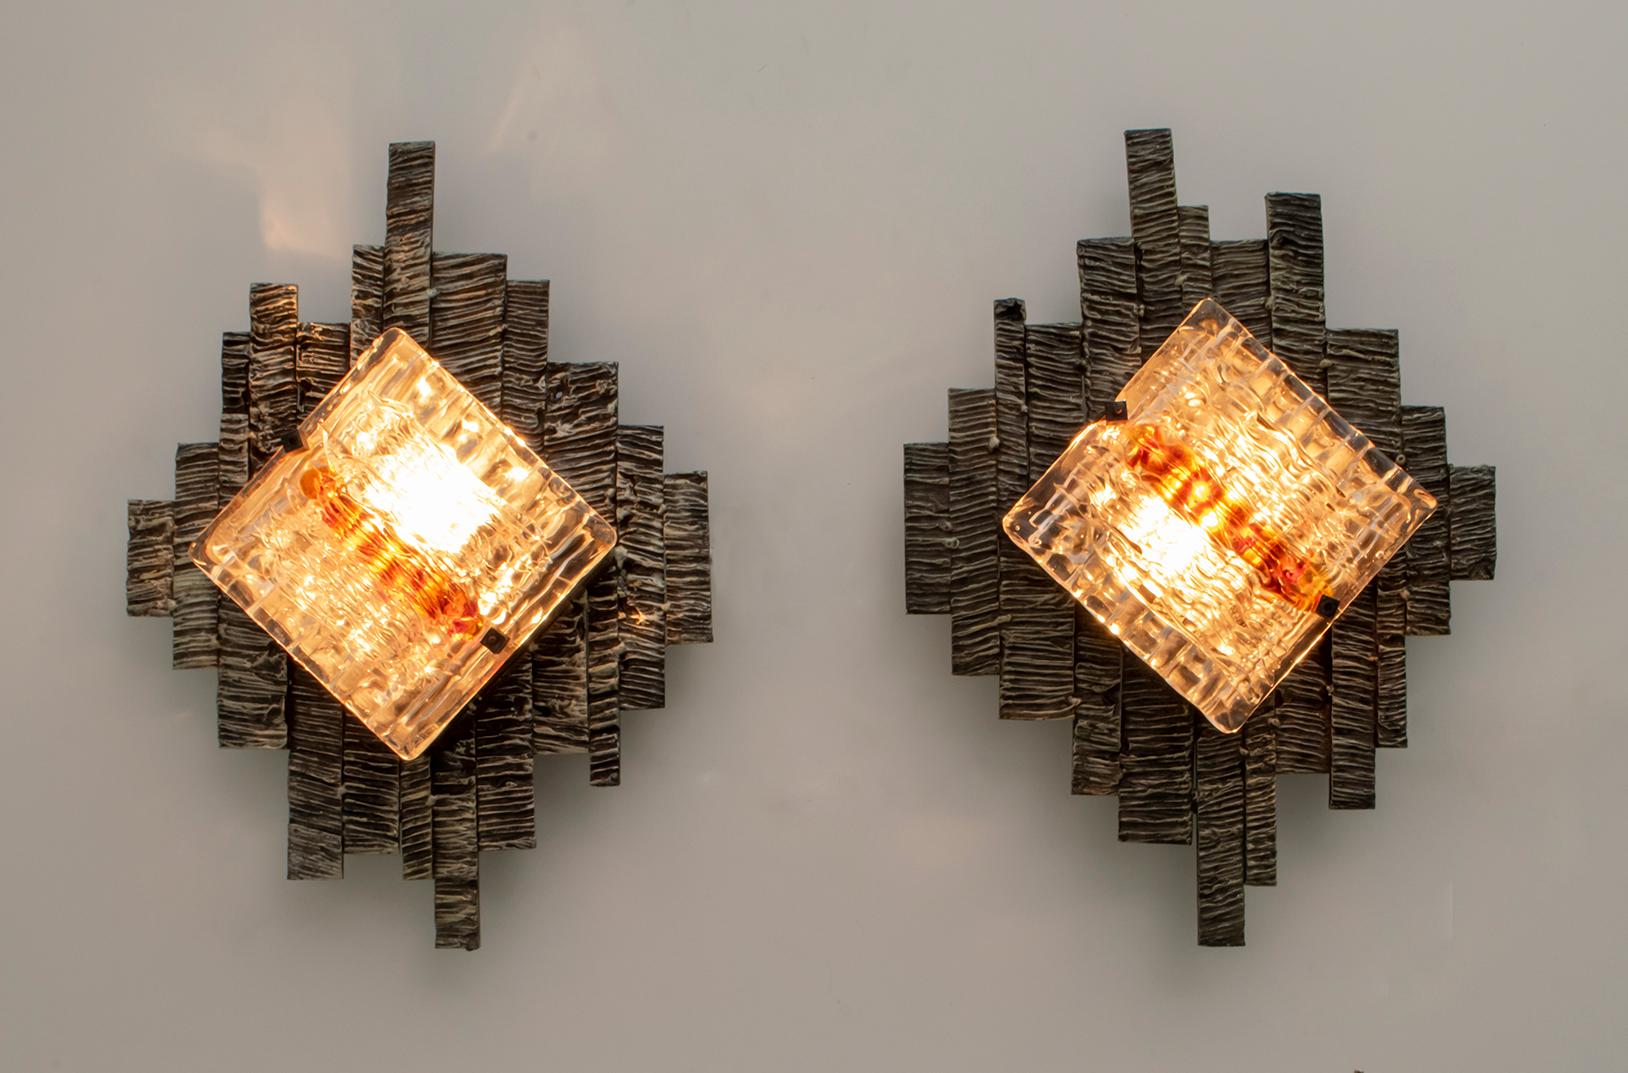 These wall lamps were created by the master glassmaker Albano Poli for his Poliarte company. The wall lamps have a patinated and handmade metal base, two squares in white relief glass with brick red serpentines. The sconces can be fixed vertically